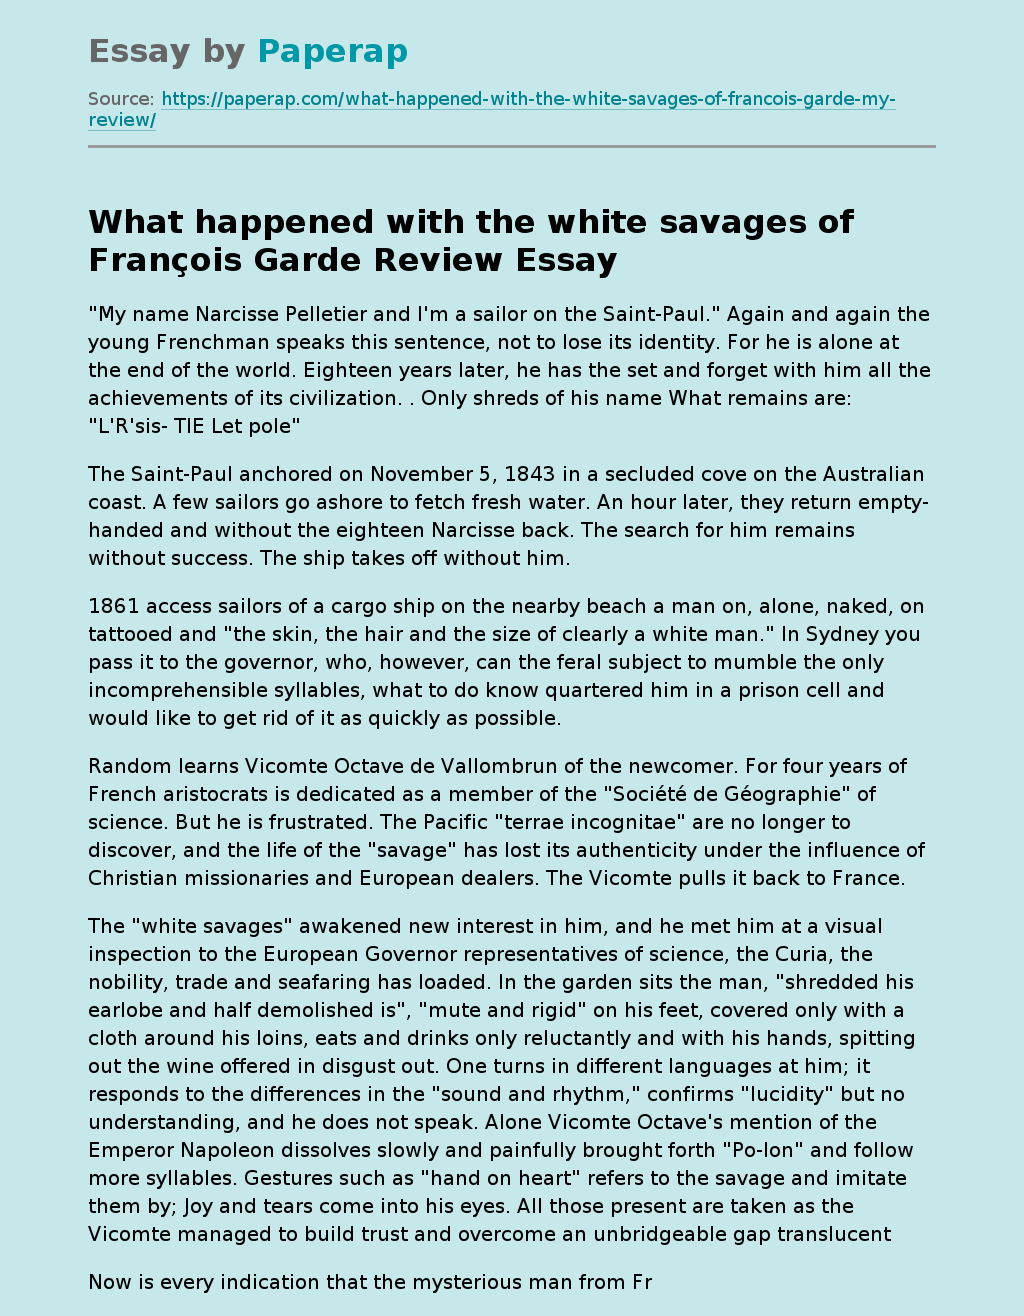 What Happened With the White Savages of François Garde Review?